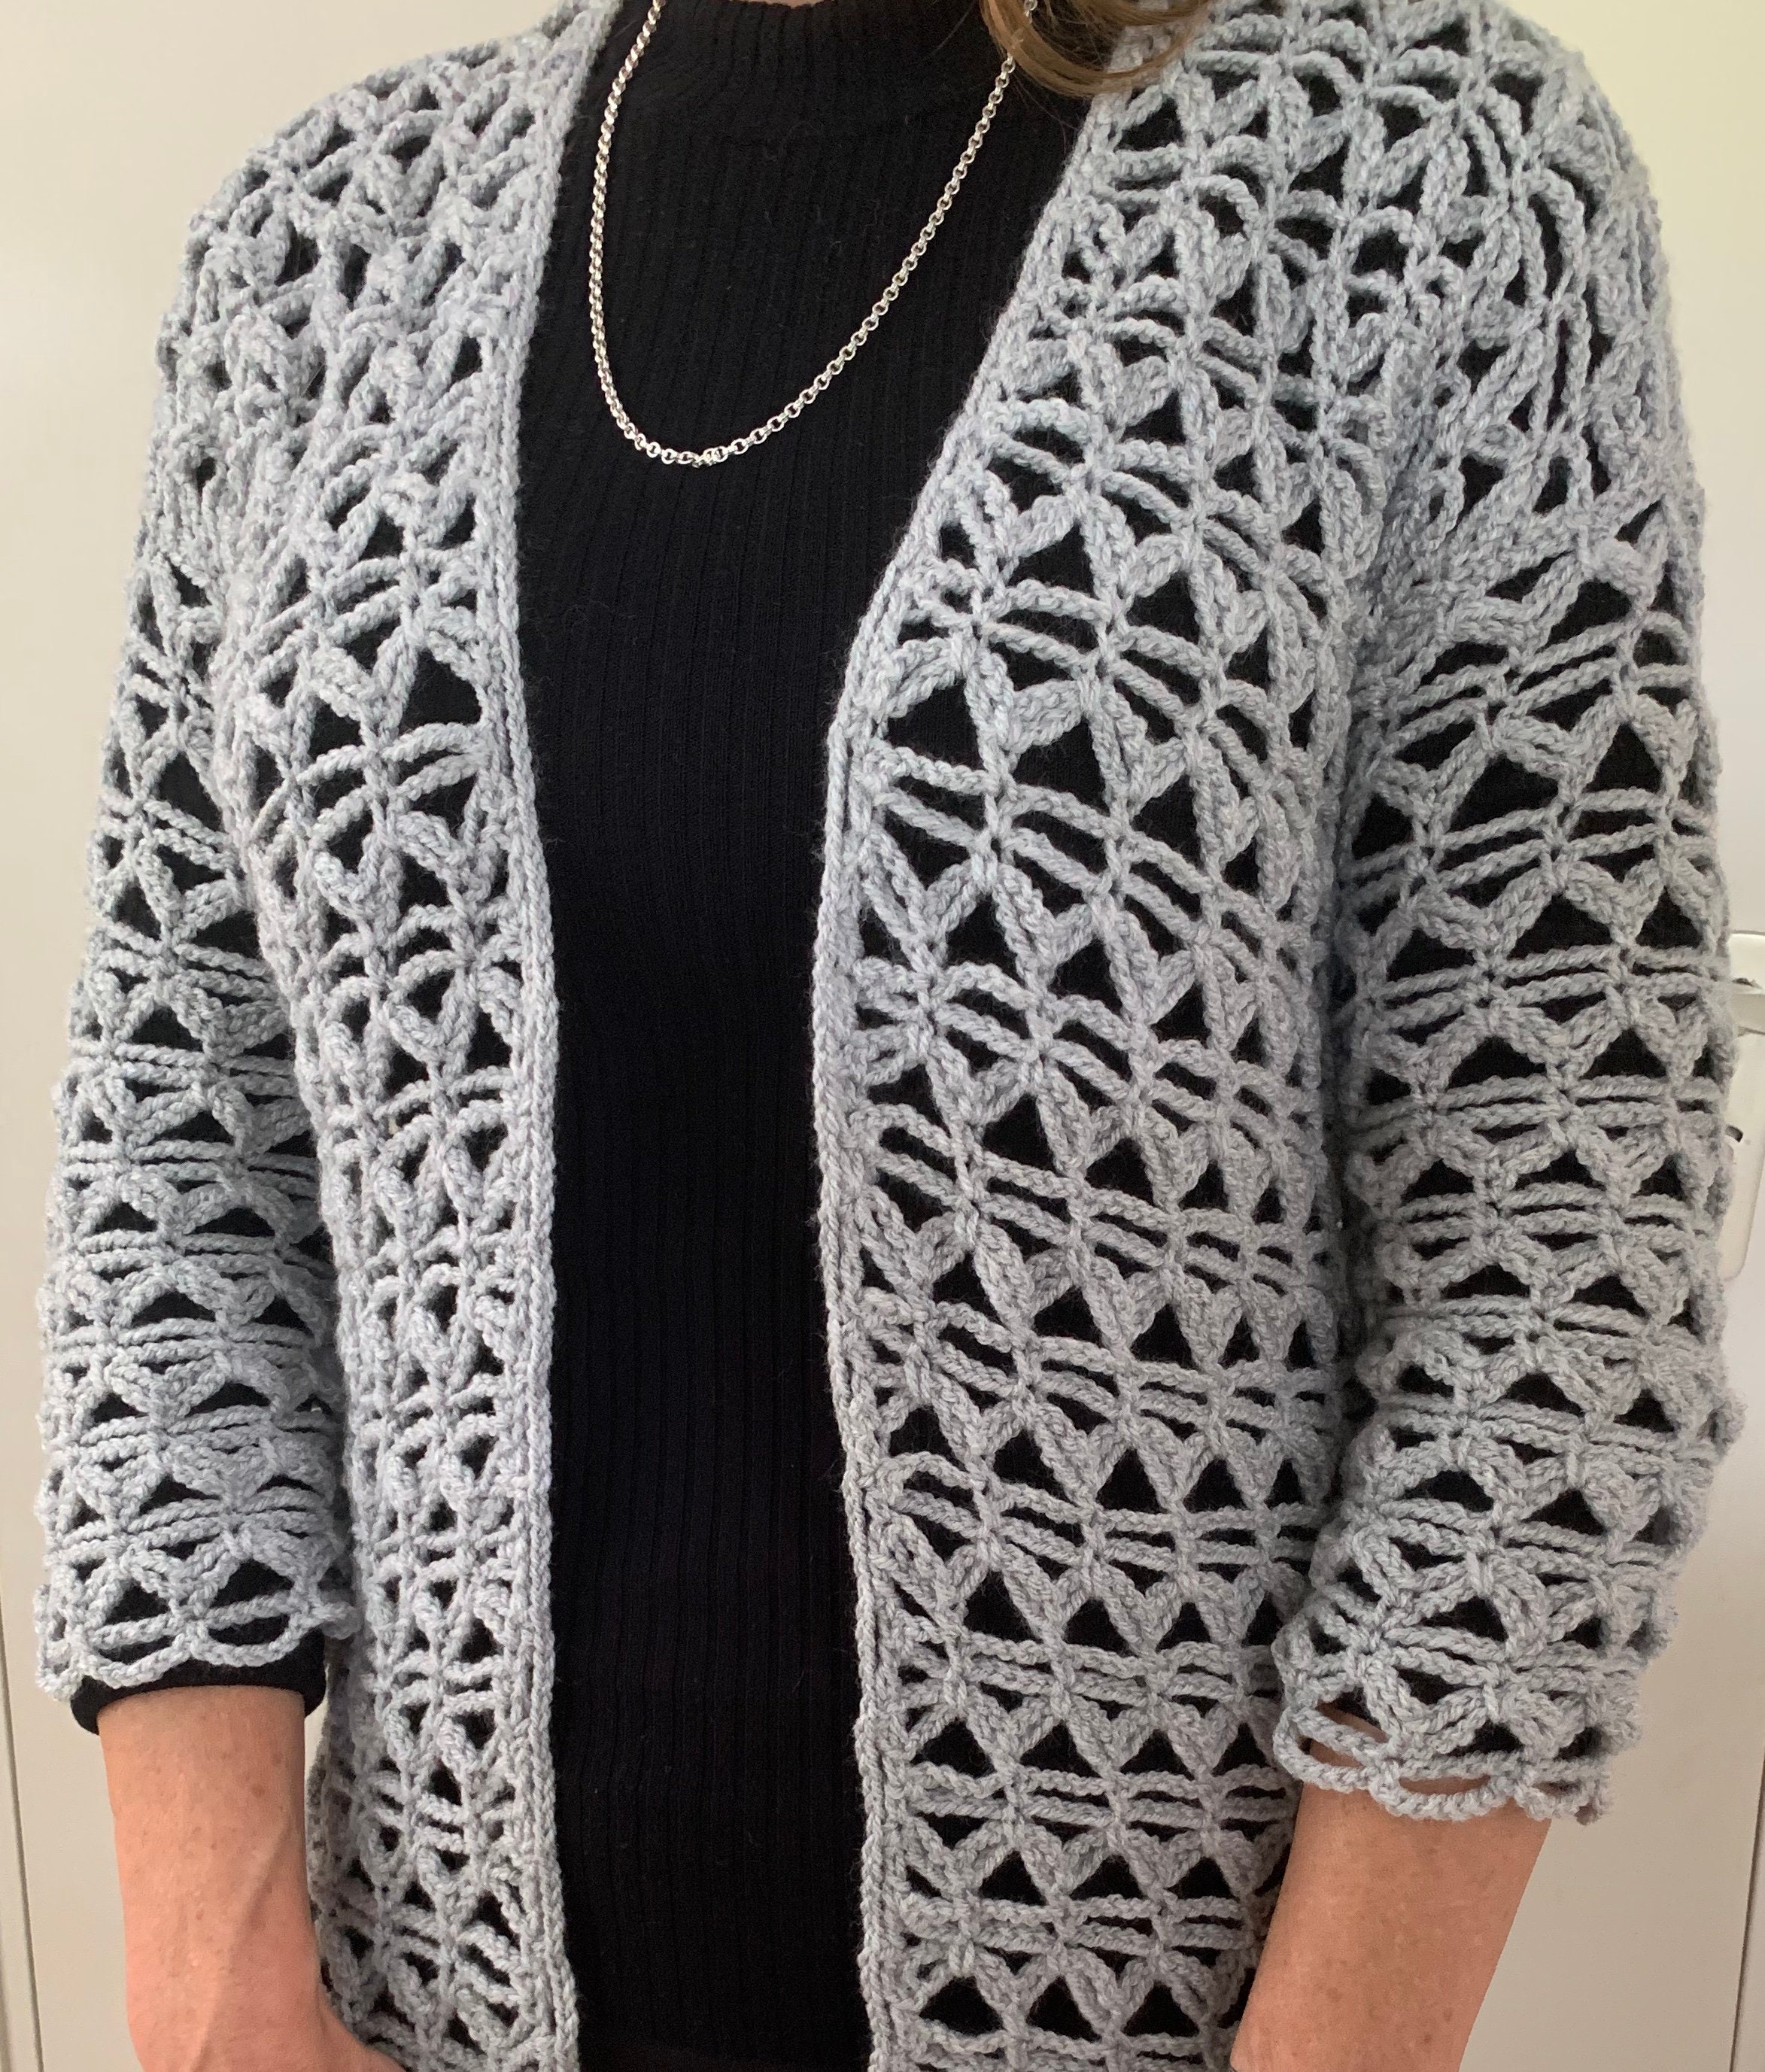 Caught in Triangles Cardigan PATTERN | Etsy